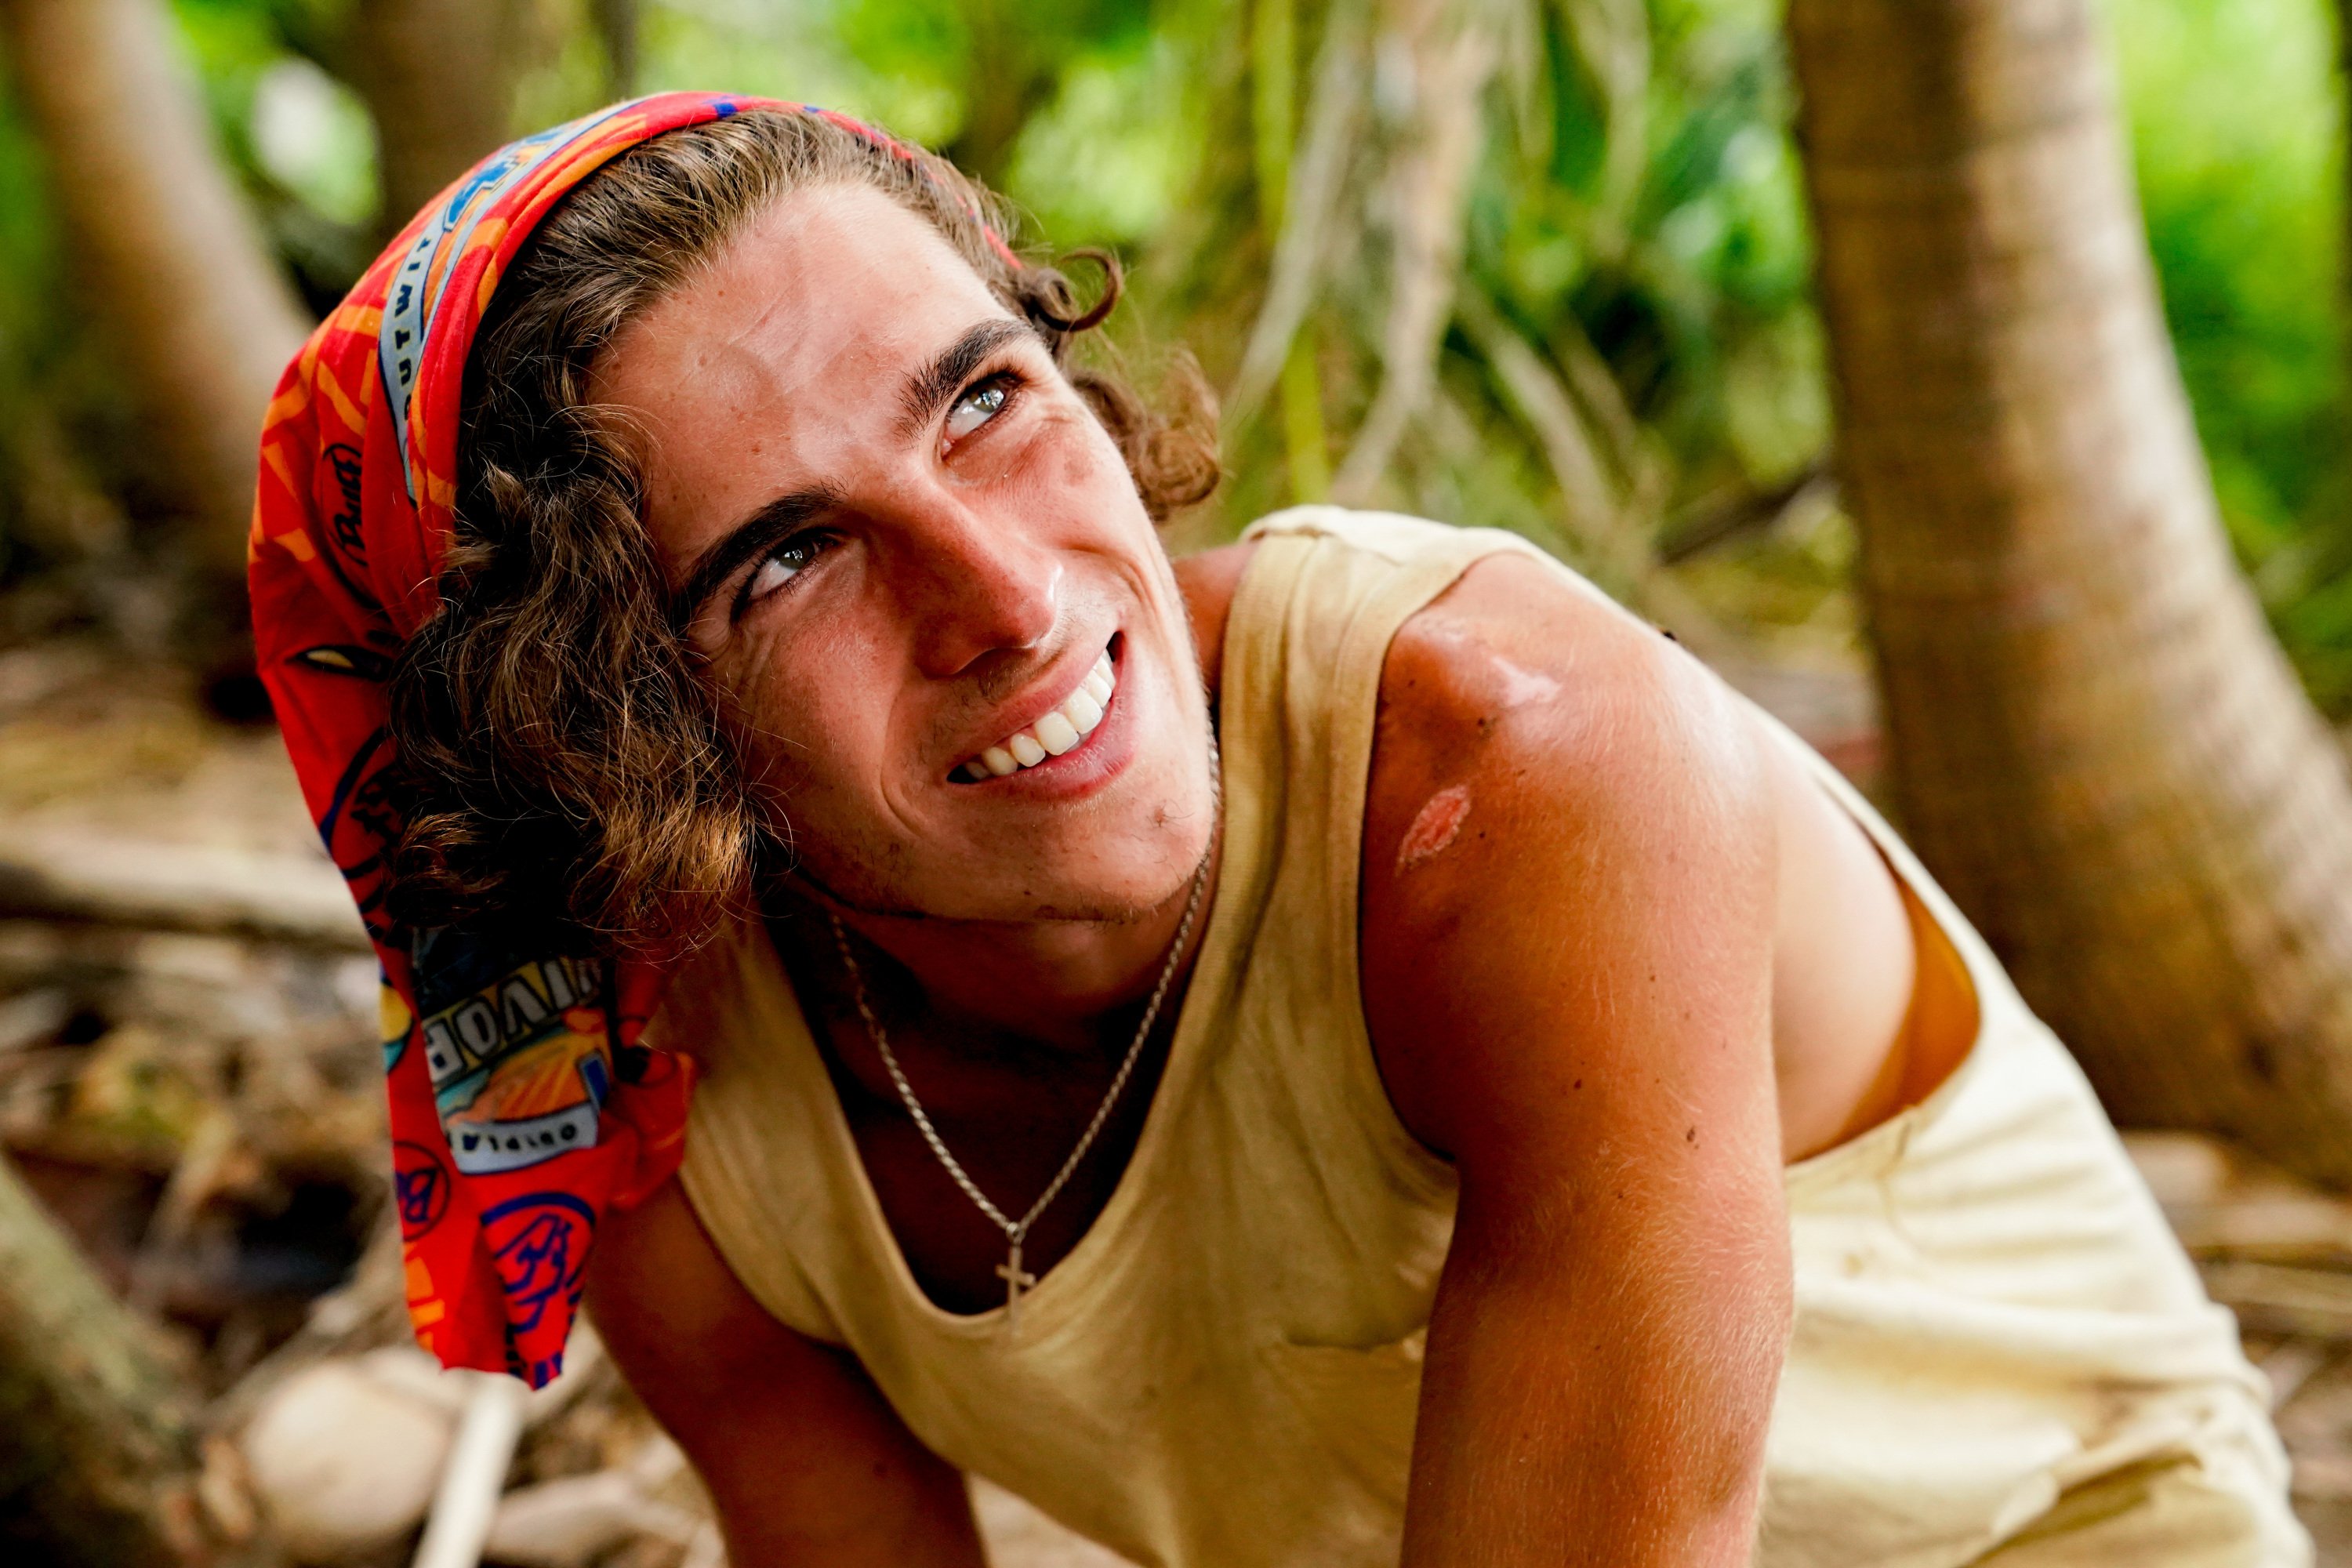 'Survivor' Season 41 star Xander Hastings wears a yellow tank top, a necklace with a cross, and a buff on his head. A new episode of 'Survivor' airs tonight, Nov. 24.